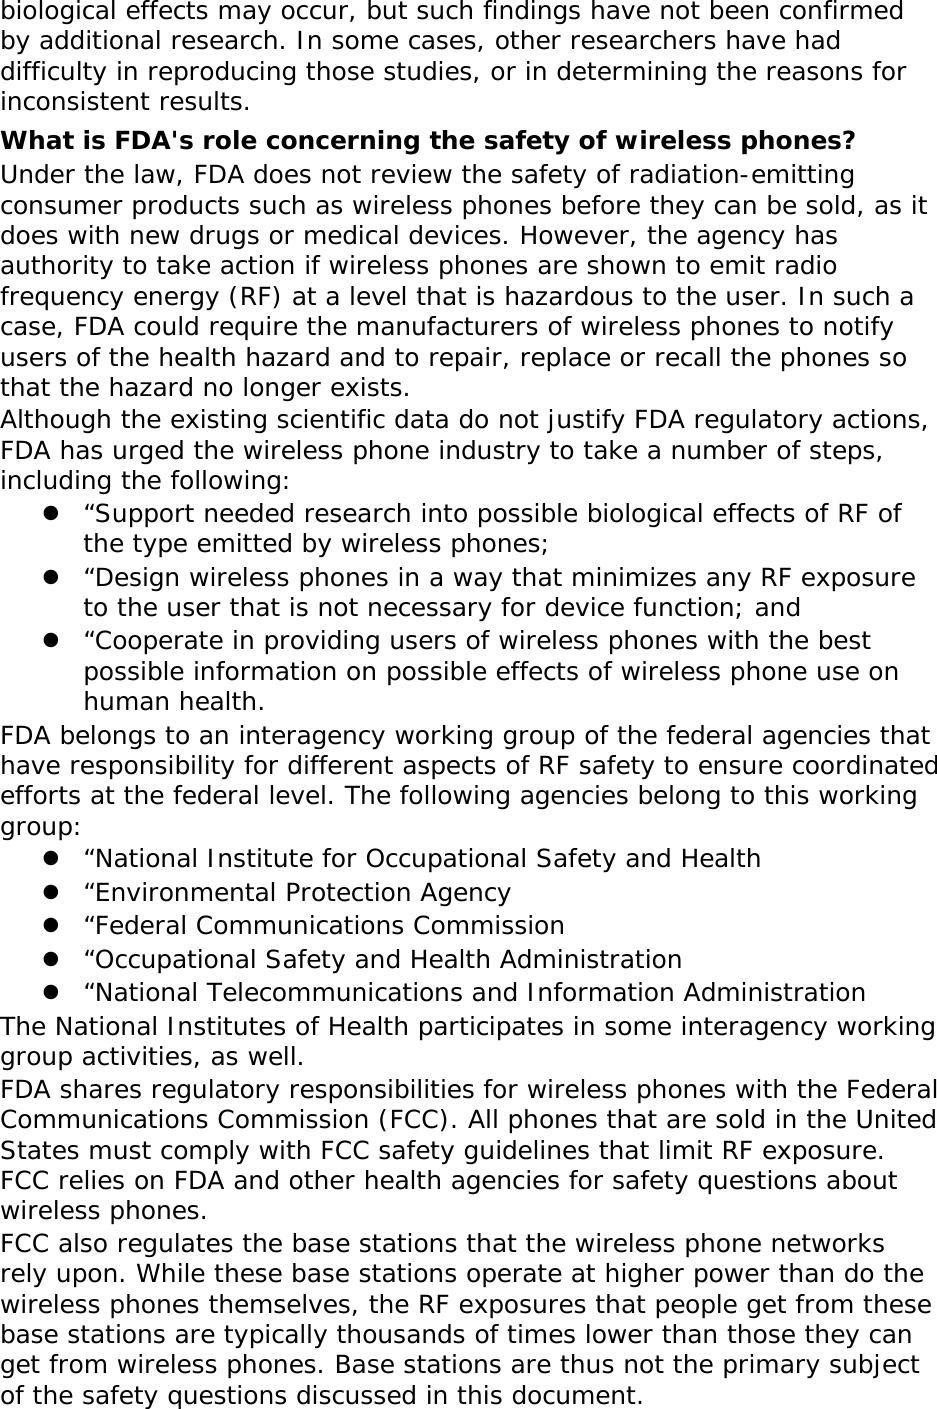 biological effects may occur, but such findings have not been confirmed by additional research. In some cases, other researchers have had difficulty in reproducing those studies, or in determining the reasons for inconsistent results. What is FDA&apos;s role concerning the safety of wireless phones? Under the law, FDA does not review the safety of radiation-emitting consumer products such as wireless phones before they can be sold, as it does with new drugs or medical devices. However, the agency has authority to take action if wireless phones are shown to emit radio frequency energy (RF) at a level that is hazardous to the user. In such a case, FDA could require the manufacturers of wireless phones to notify users of the health hazard and to repair, replace or recall the phones so that the hazard no longer exists. Although the existing scientific data do not justify FDA regulatory actions, FDA has urged the wireless phone industry to take a number of steps, including the following:  “Support needed research into possible biological effects of RF of the type emitted by wireless phones;  “Design wireless phones in a way that minimizes any RF exposure to the user that is not necessary for device function; and  “Cooperate in providing users of wireless phones with the best possible information on possible effects of wireless phone use on human health. FDA belongs to an interagency working group of the federal agencies that have responsibility for different aspects of RF safety to ensure coordinated efforts at the federal level. The following agencies belong to this working group:  “National Institute for Occupational Safety and Health  “Environmental Protection Agency  “Federal Communications Commission  “Occupational Safety and Health Administration  “National Telecommunications and Information Administration The National Institutes of Health participates in some interagency working group activities, as well. FDA shares regulatory responsibilities for wireless phones with the Federal Communications Commission (FCC). All phones that are sold in the United States must comply with FCC safety guidelines that limit RF exposure. FCC relies on FDA and other health agencies for safety questions about wireless phones. FCC also regulates the base stations that the wireless phone networks rely upon. While these base stations operate at higher power than do the wireless phones themselves, the RF exposures that people get from these base stations are typically thousands of times lower than those they can get from wireless phones. Base stations are thus not the primary subject of the safety questions discussed in this document. 